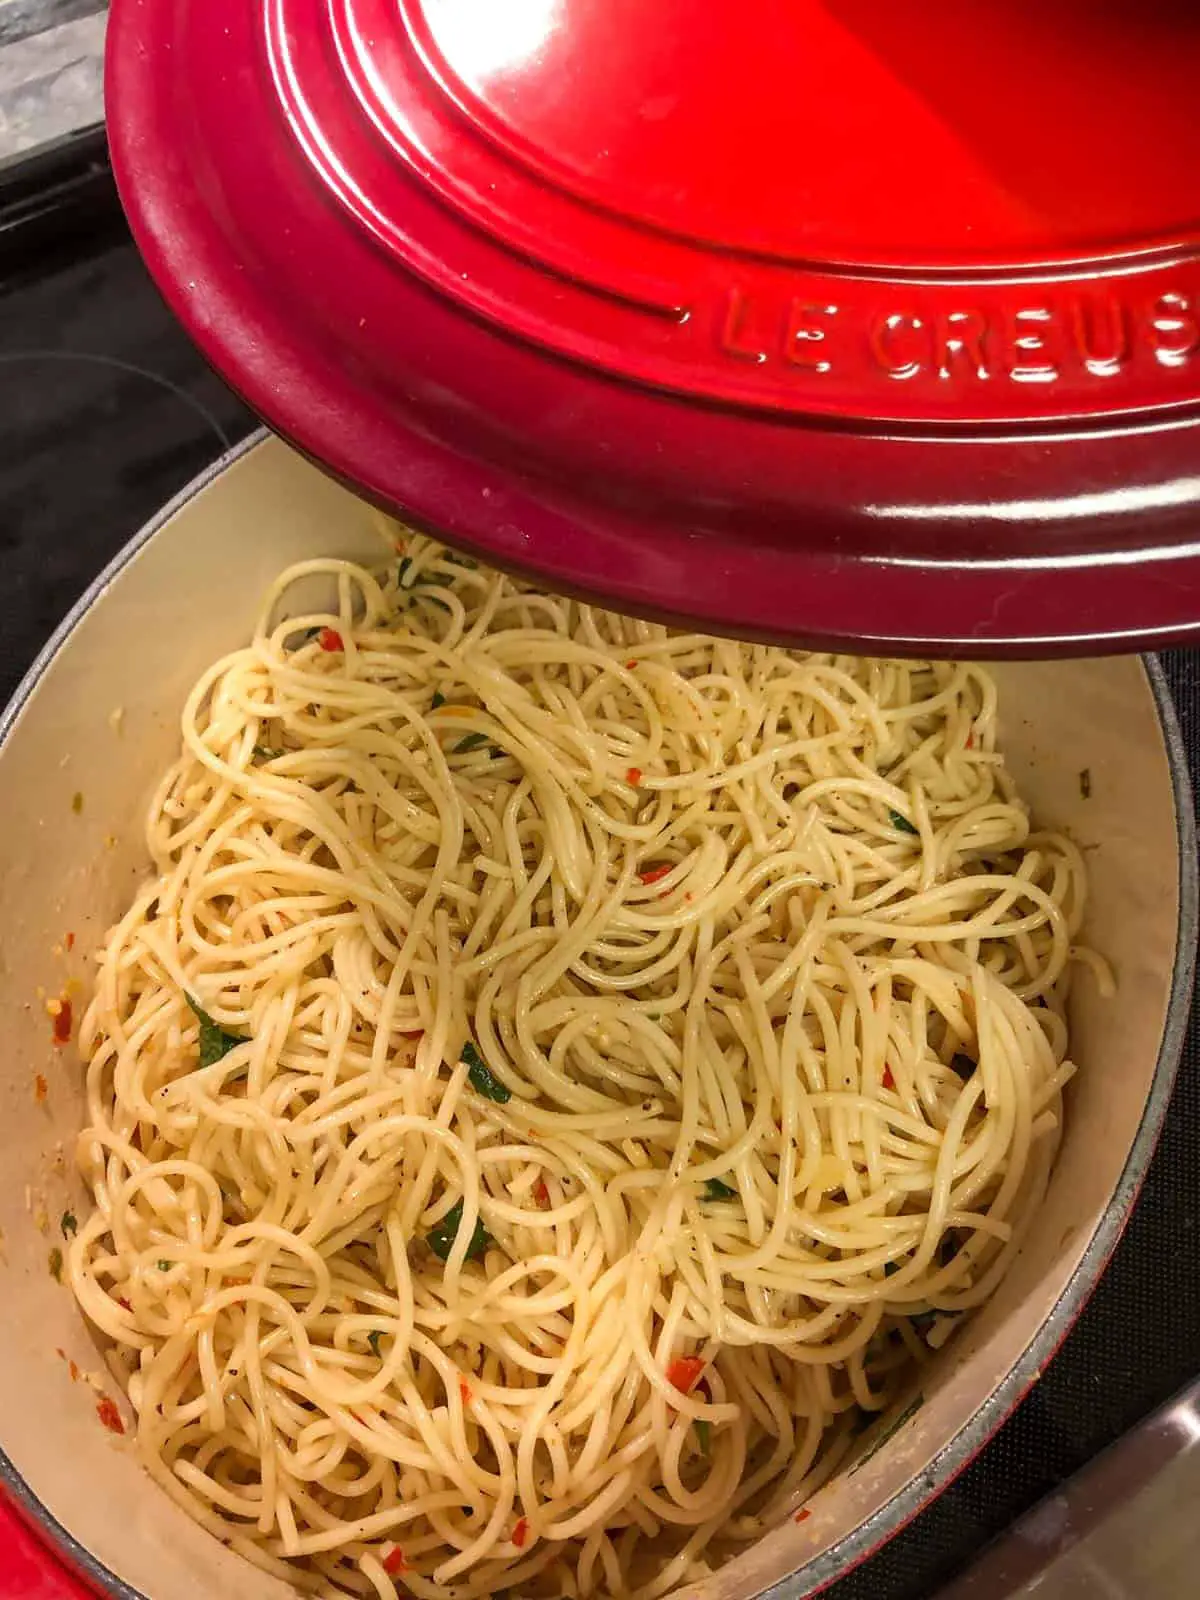 A red Le Creuset dutch oven containing spaghetti with the red lid being held above it.